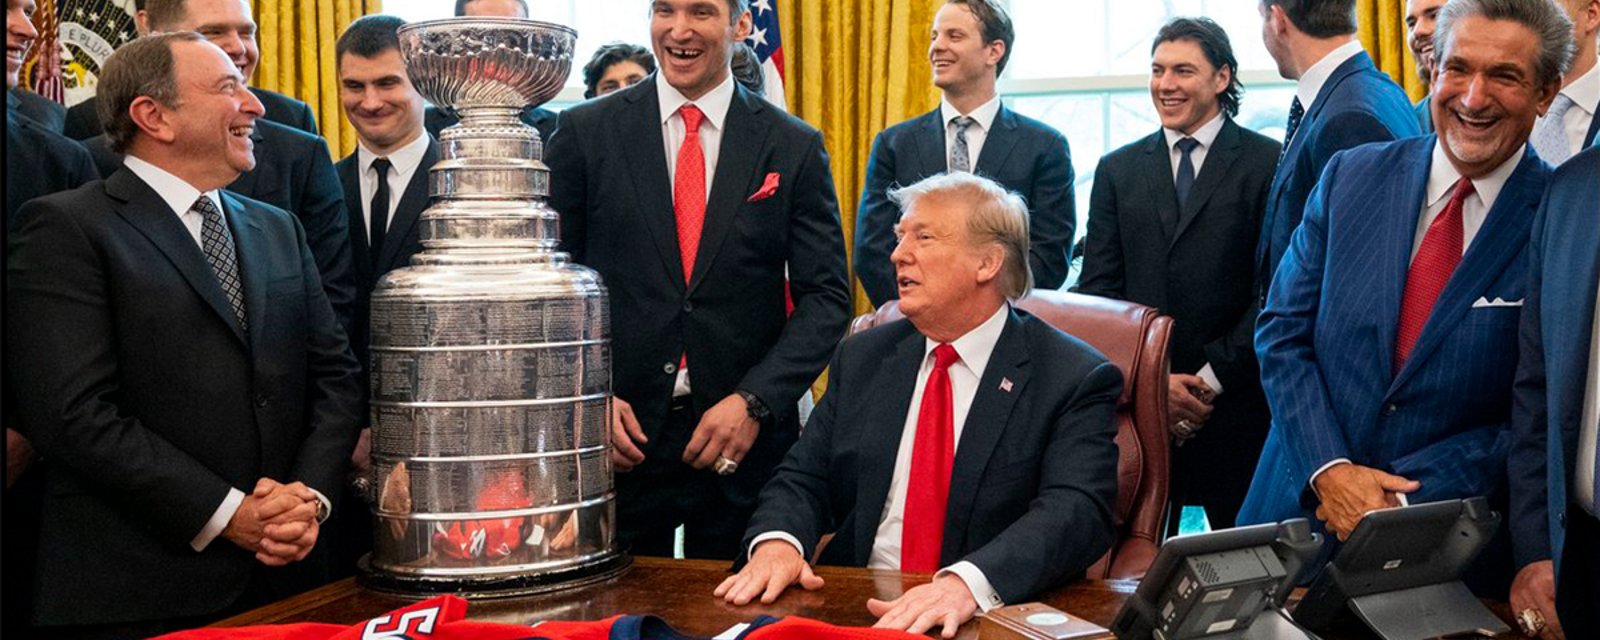 Trump puts Ovechkin on the spot during White House visit